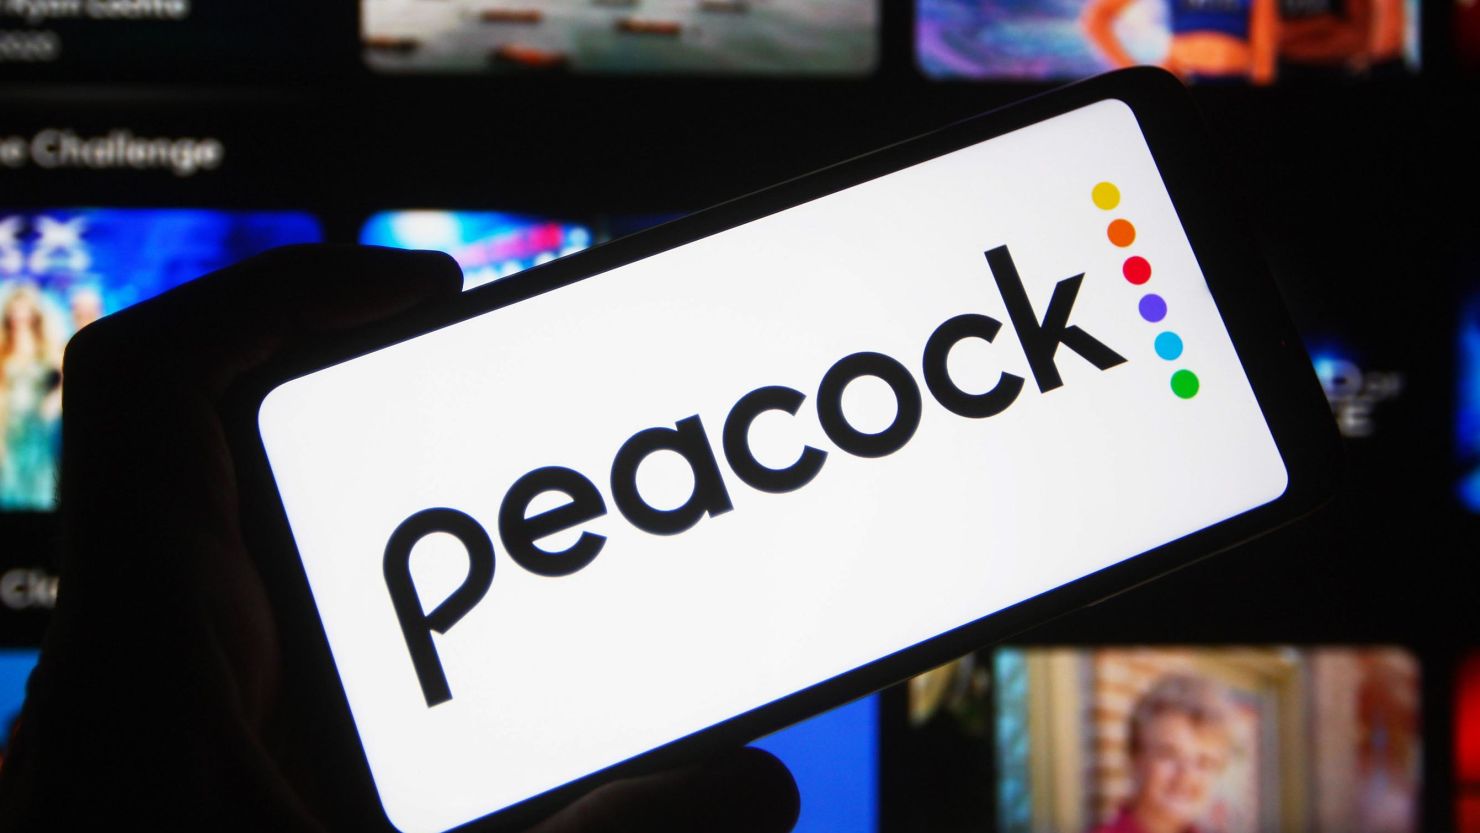 Peacock is getting its first-ever price hike